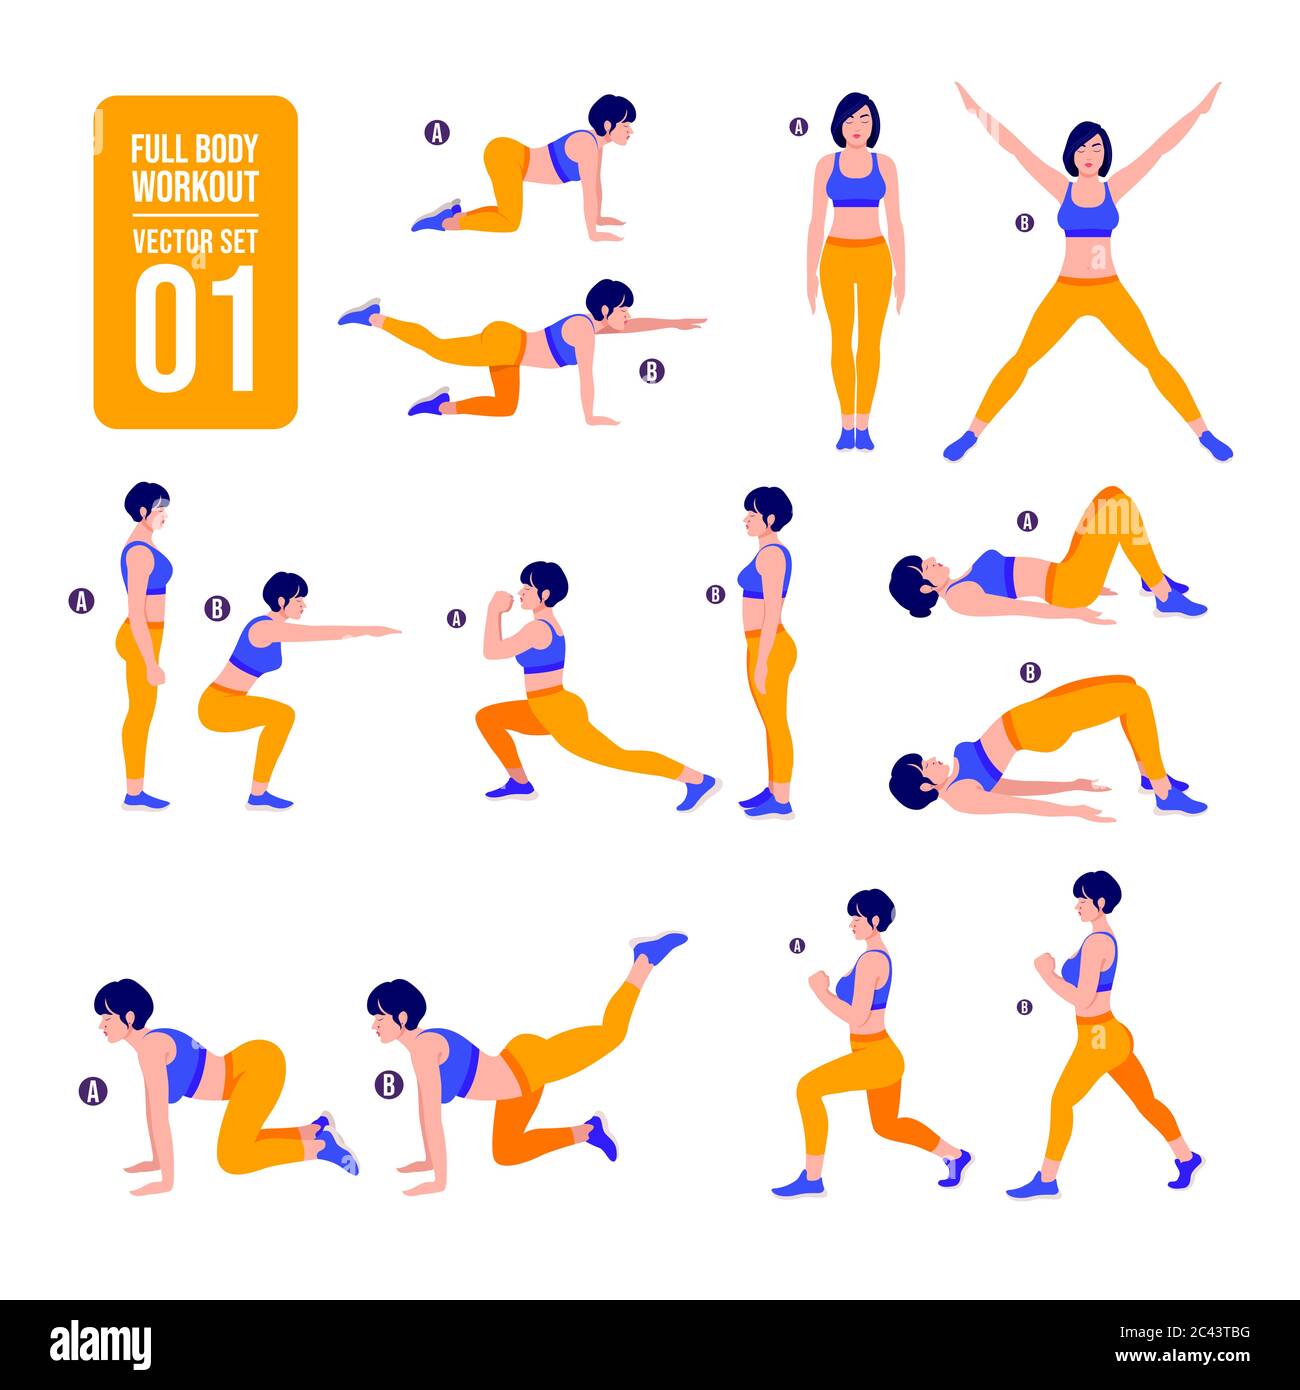 https://c8.alamy.com/comp/2C43TBG/home-workout-set-set-of-sport-exercises-exercises-with-free-weightillustration-of-an-active-lifestyle-woman-doing-fitness-and-yoga-exercises-2C43TBG.jpg